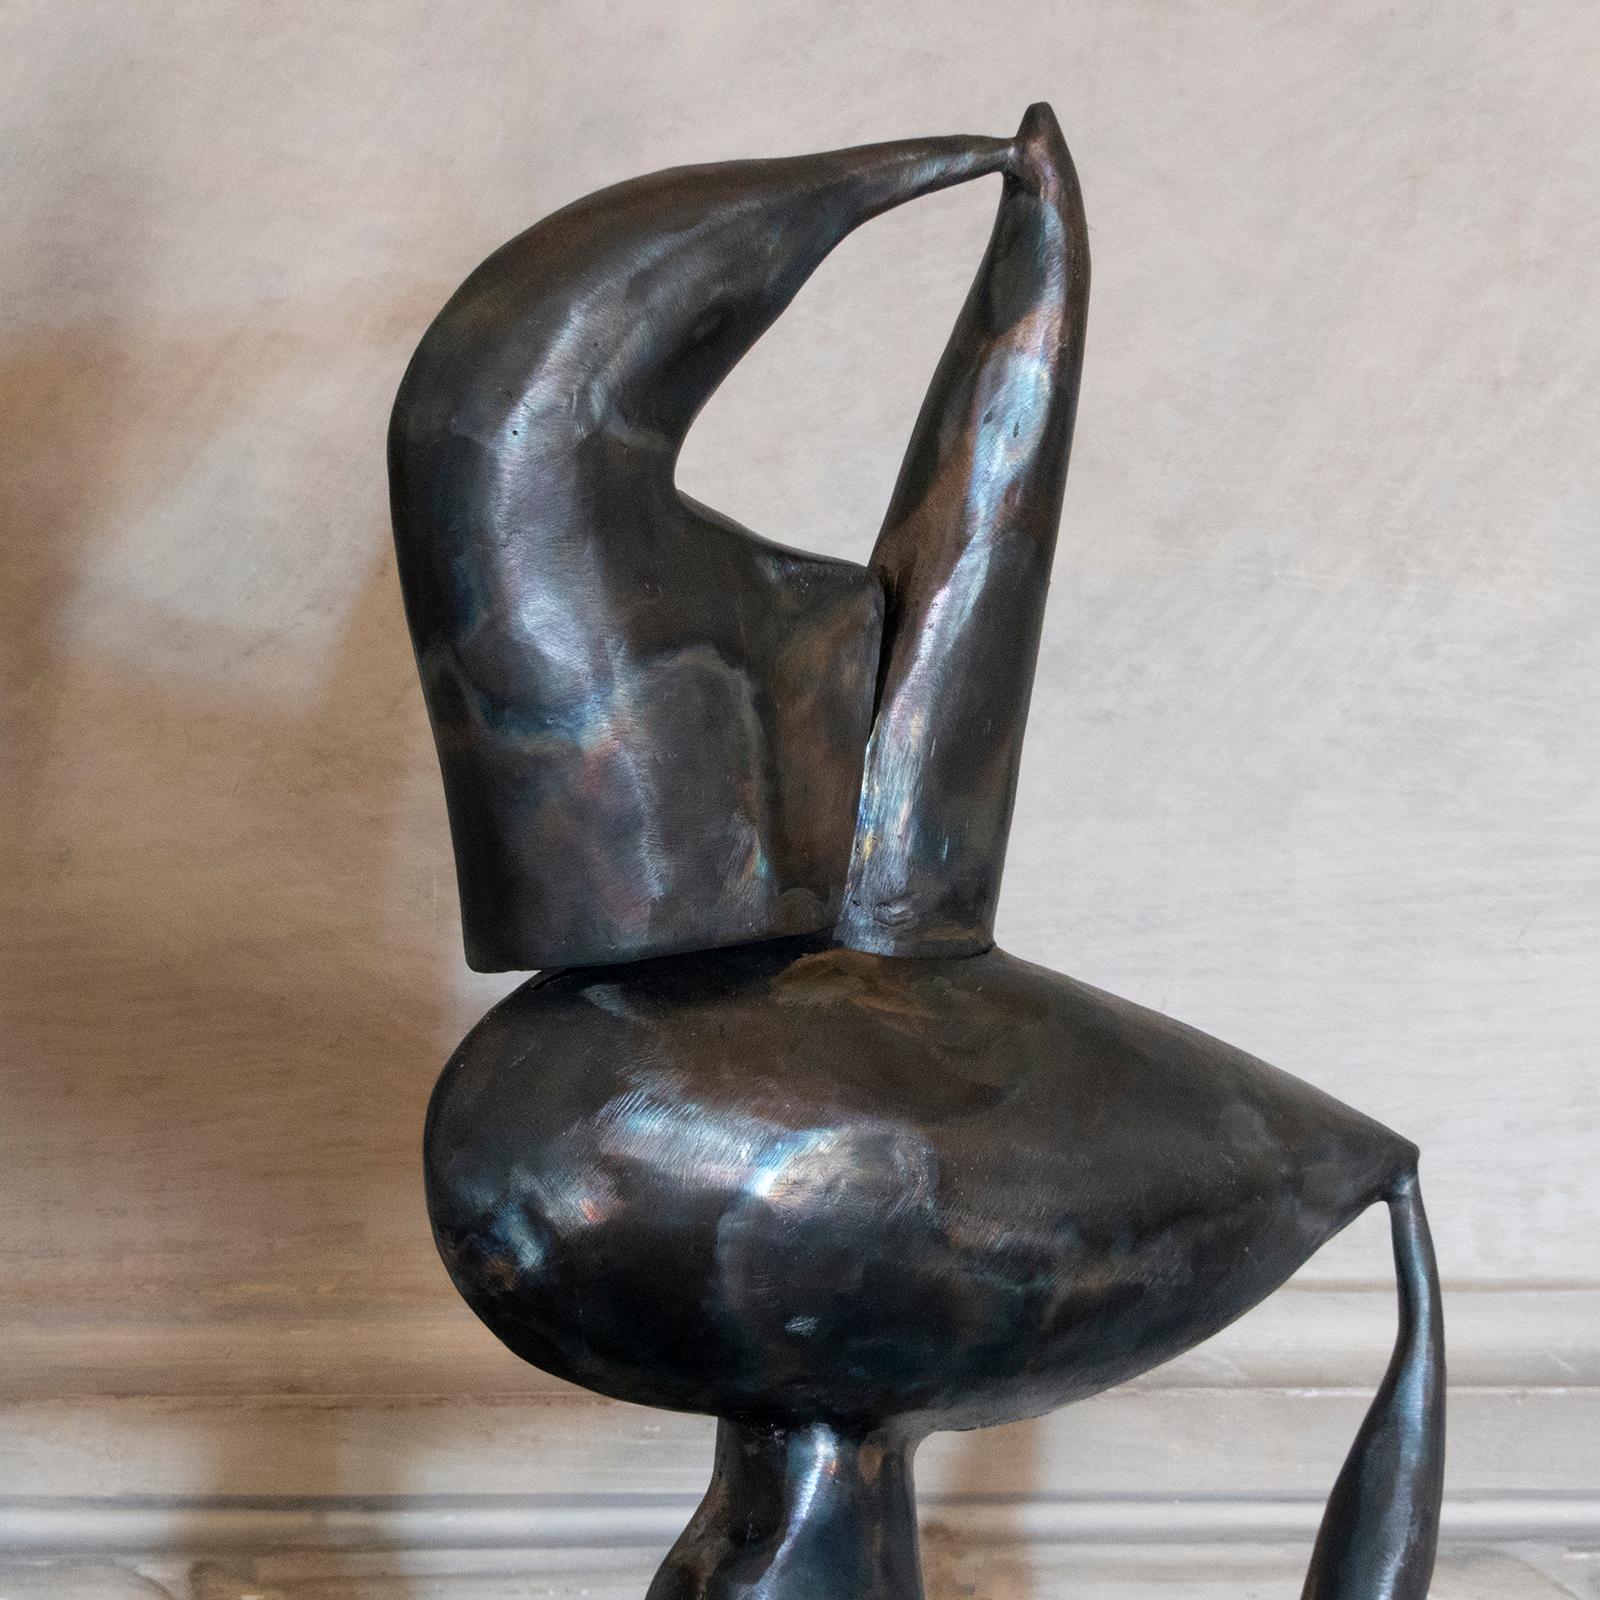 Figurative abstract sculpture in burnished steel by Marco Croce, Italy, 2018.